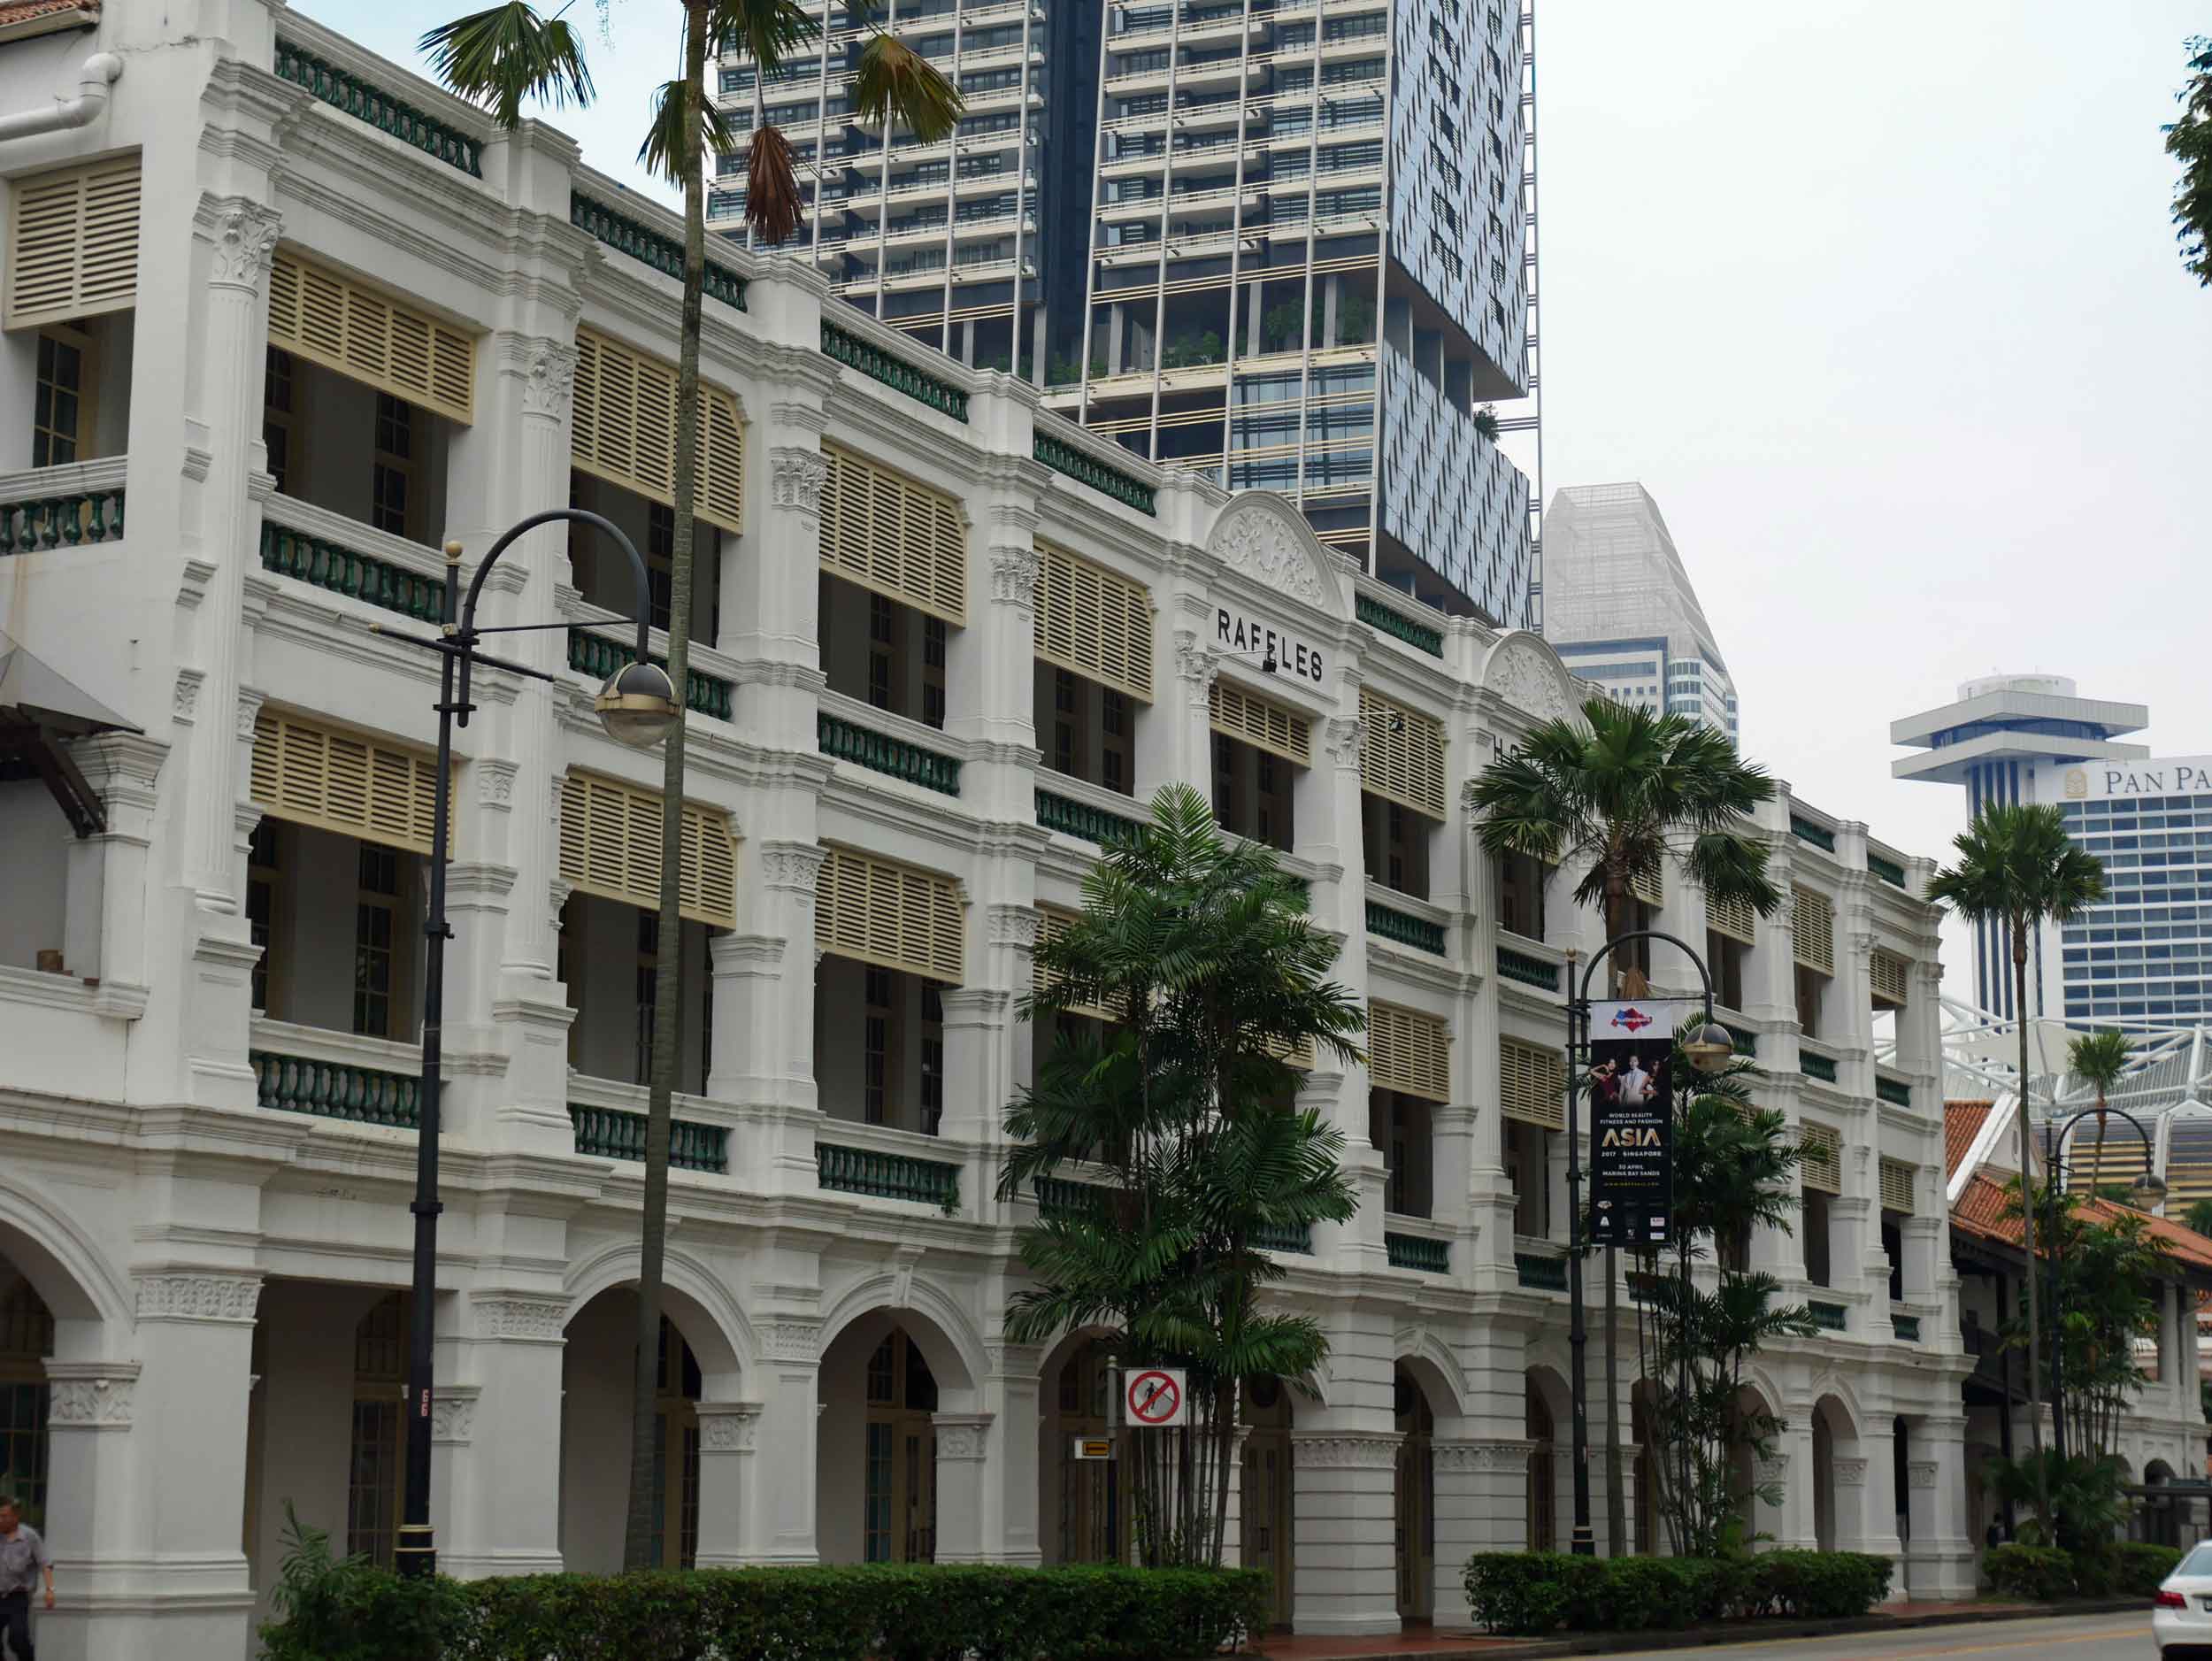  The iconic colonial-style Raffles Hotel, named after Singapore's British founder Sir Thomas Raffles, opened in 1887. 